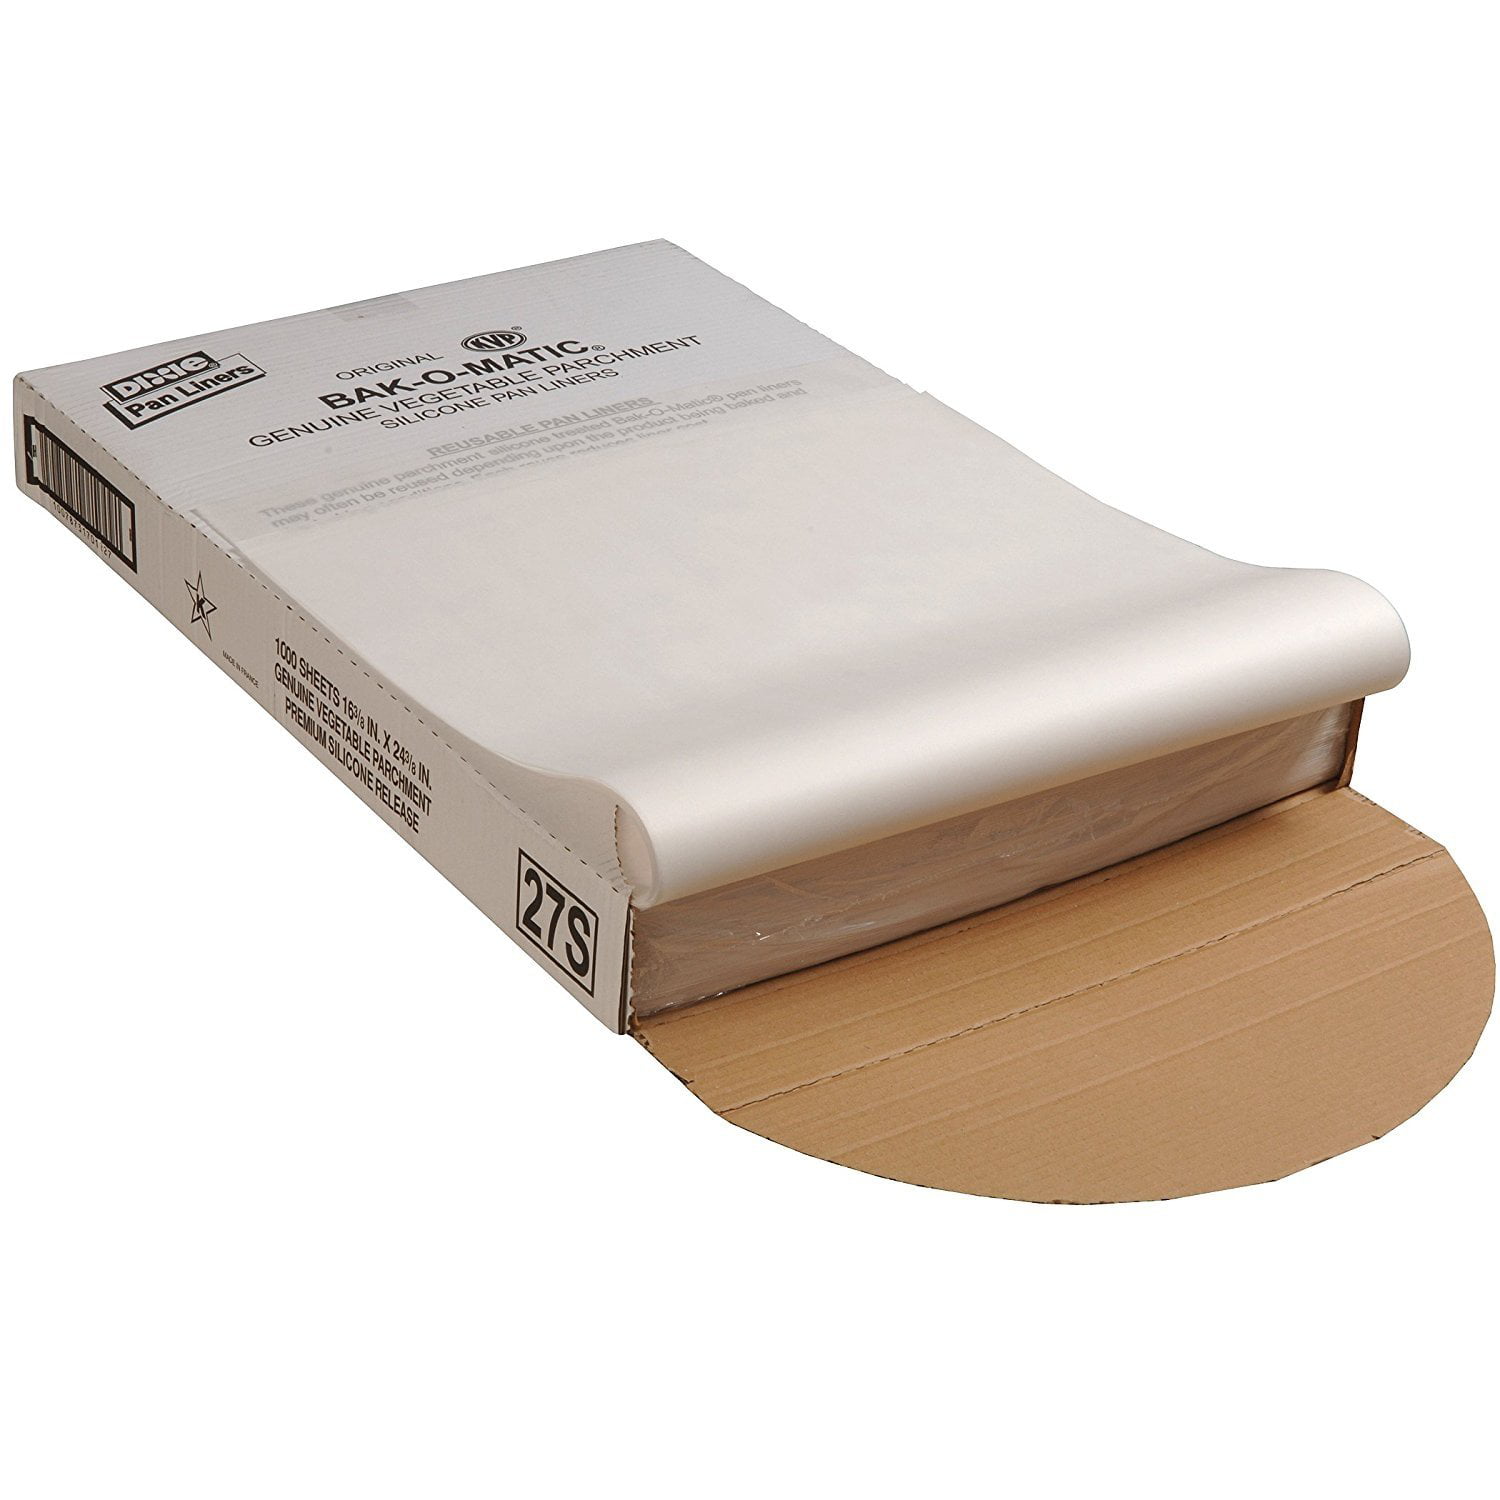 Prime Source Quilon Bakery Pan Liners 16 38 x 24 38 White Pack Of 1000  Liners - Office Depot